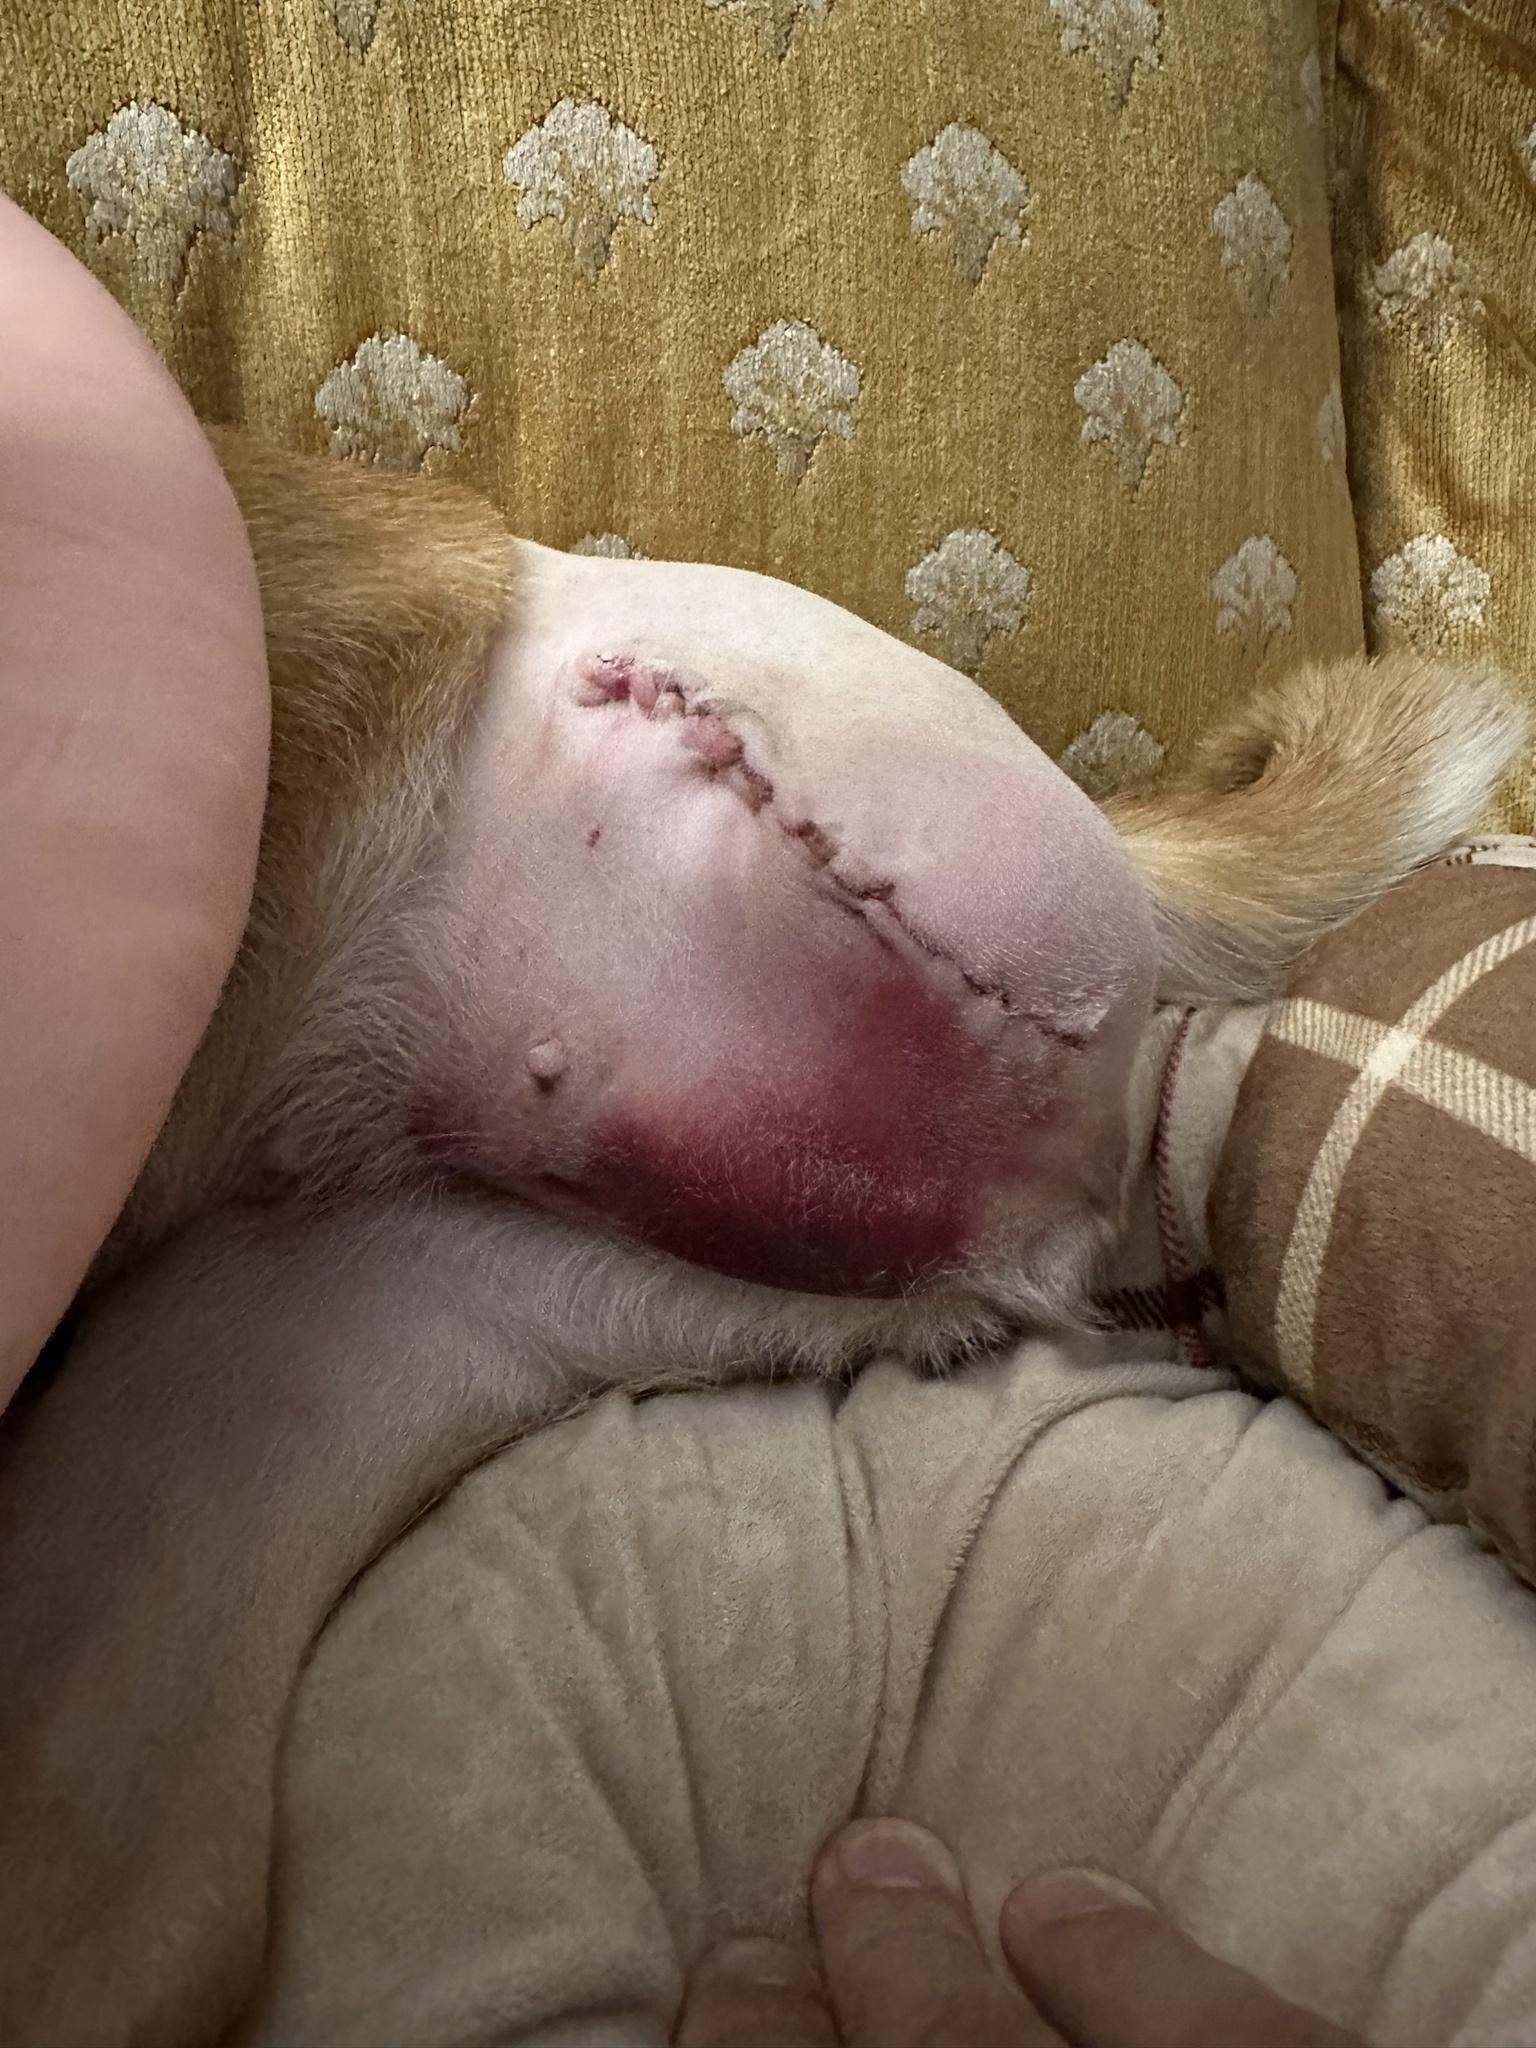 Normal bruising on new Tripawd dog.